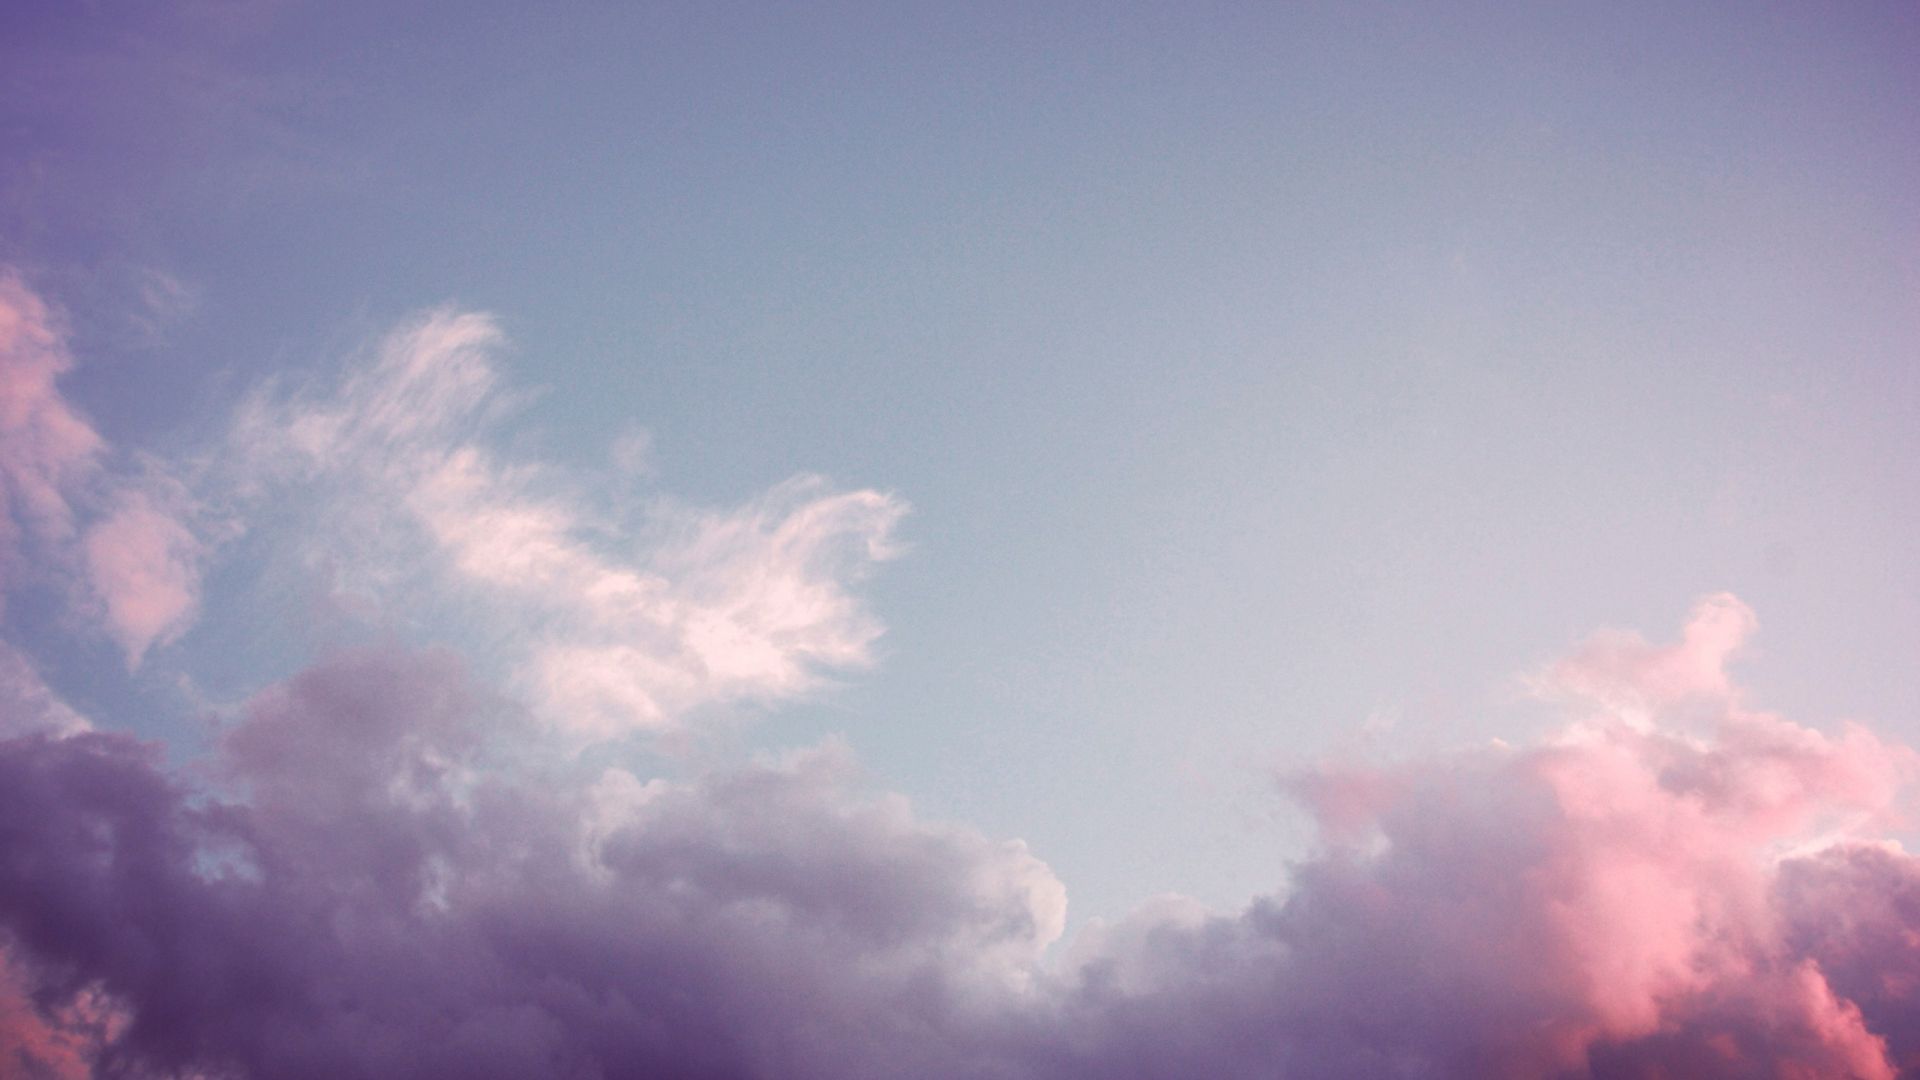 Aesthetic Clouds Wallpaper 1920x1080 56435